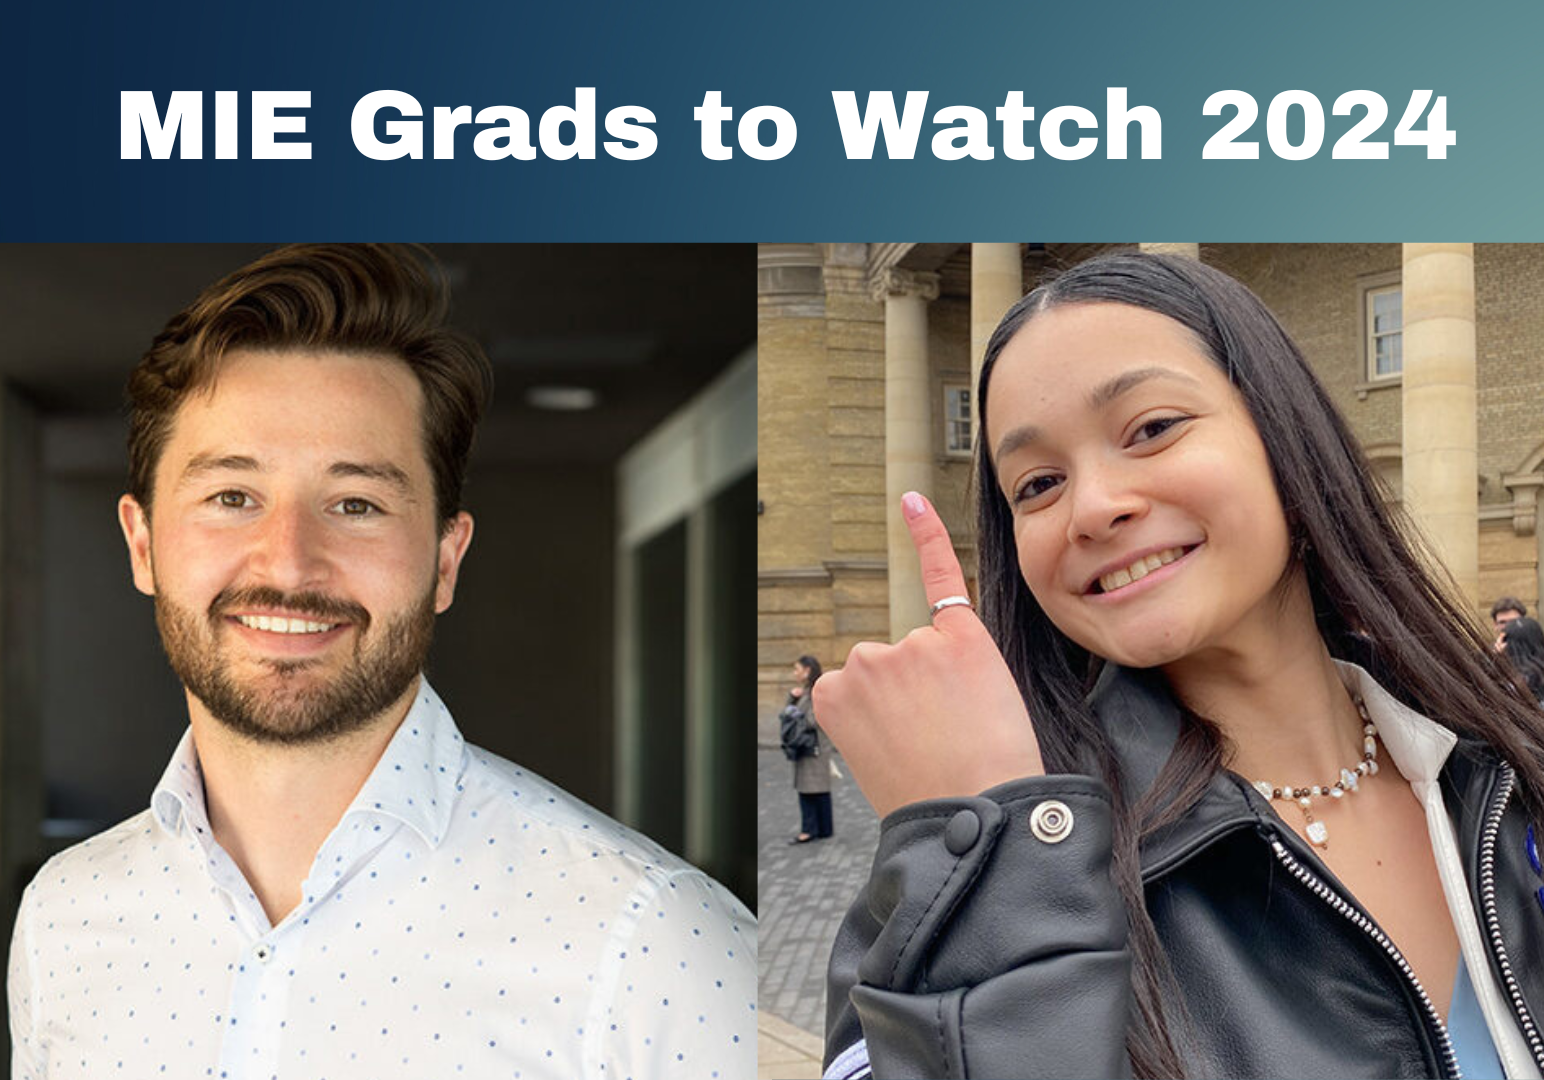 MIE grads to watch